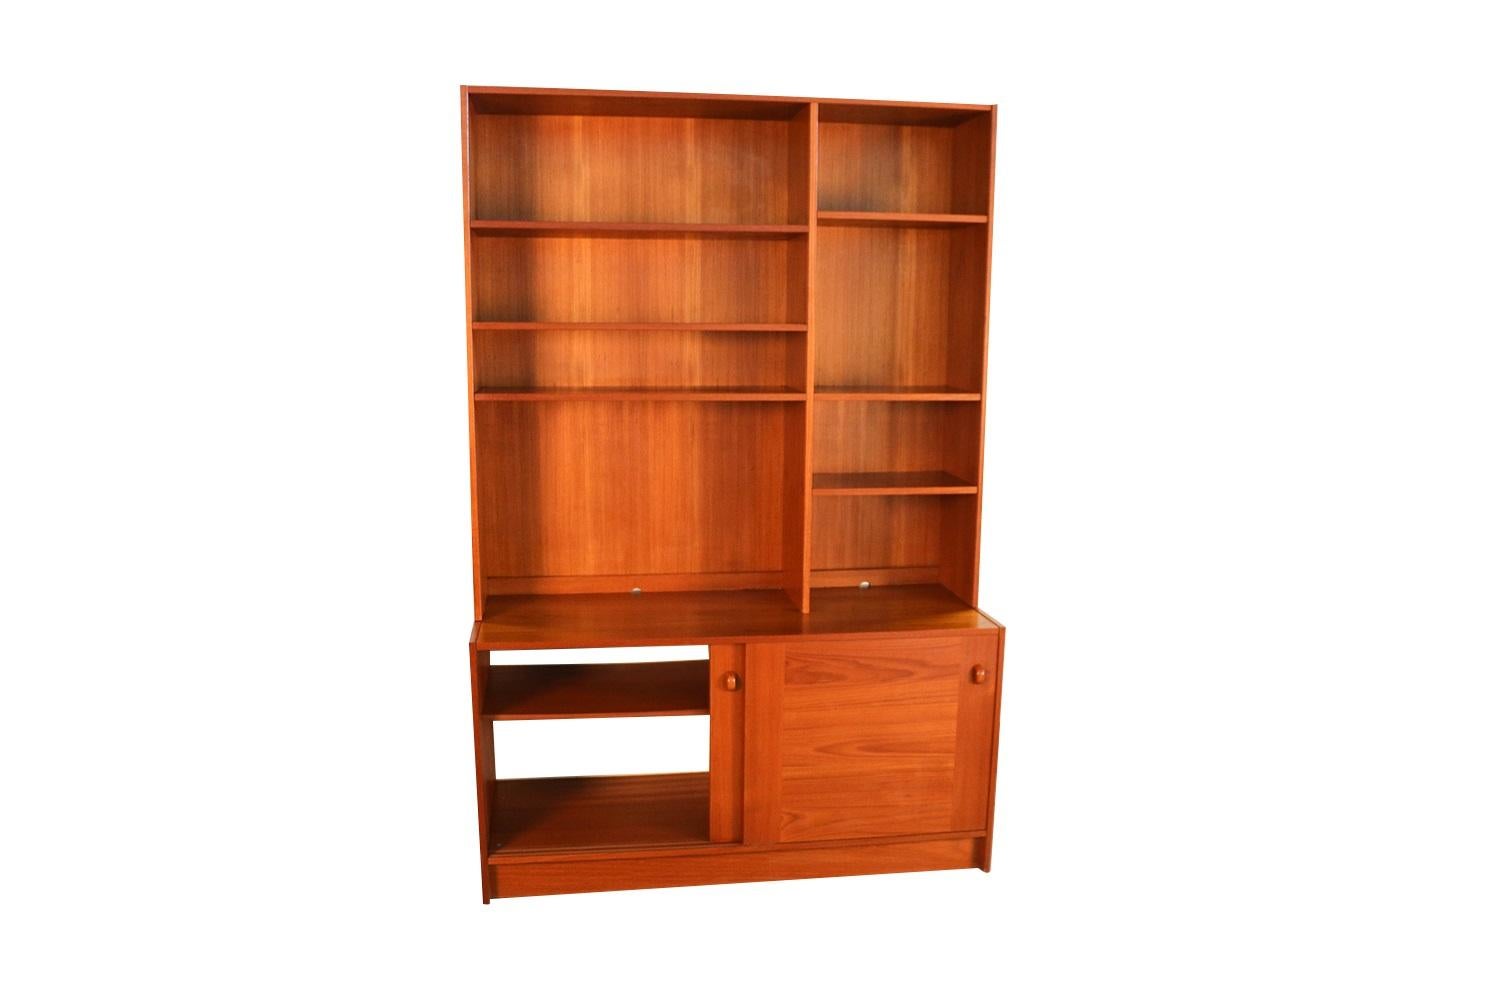 A two-piece hutch resting on a credenza base made in Denmark by Domino Mobler. A beautiful Danish modern teak credenza, wall unit, bookcase, beautifully embellished with bands of teak running perpendicular to main surface. This comes in two pieces